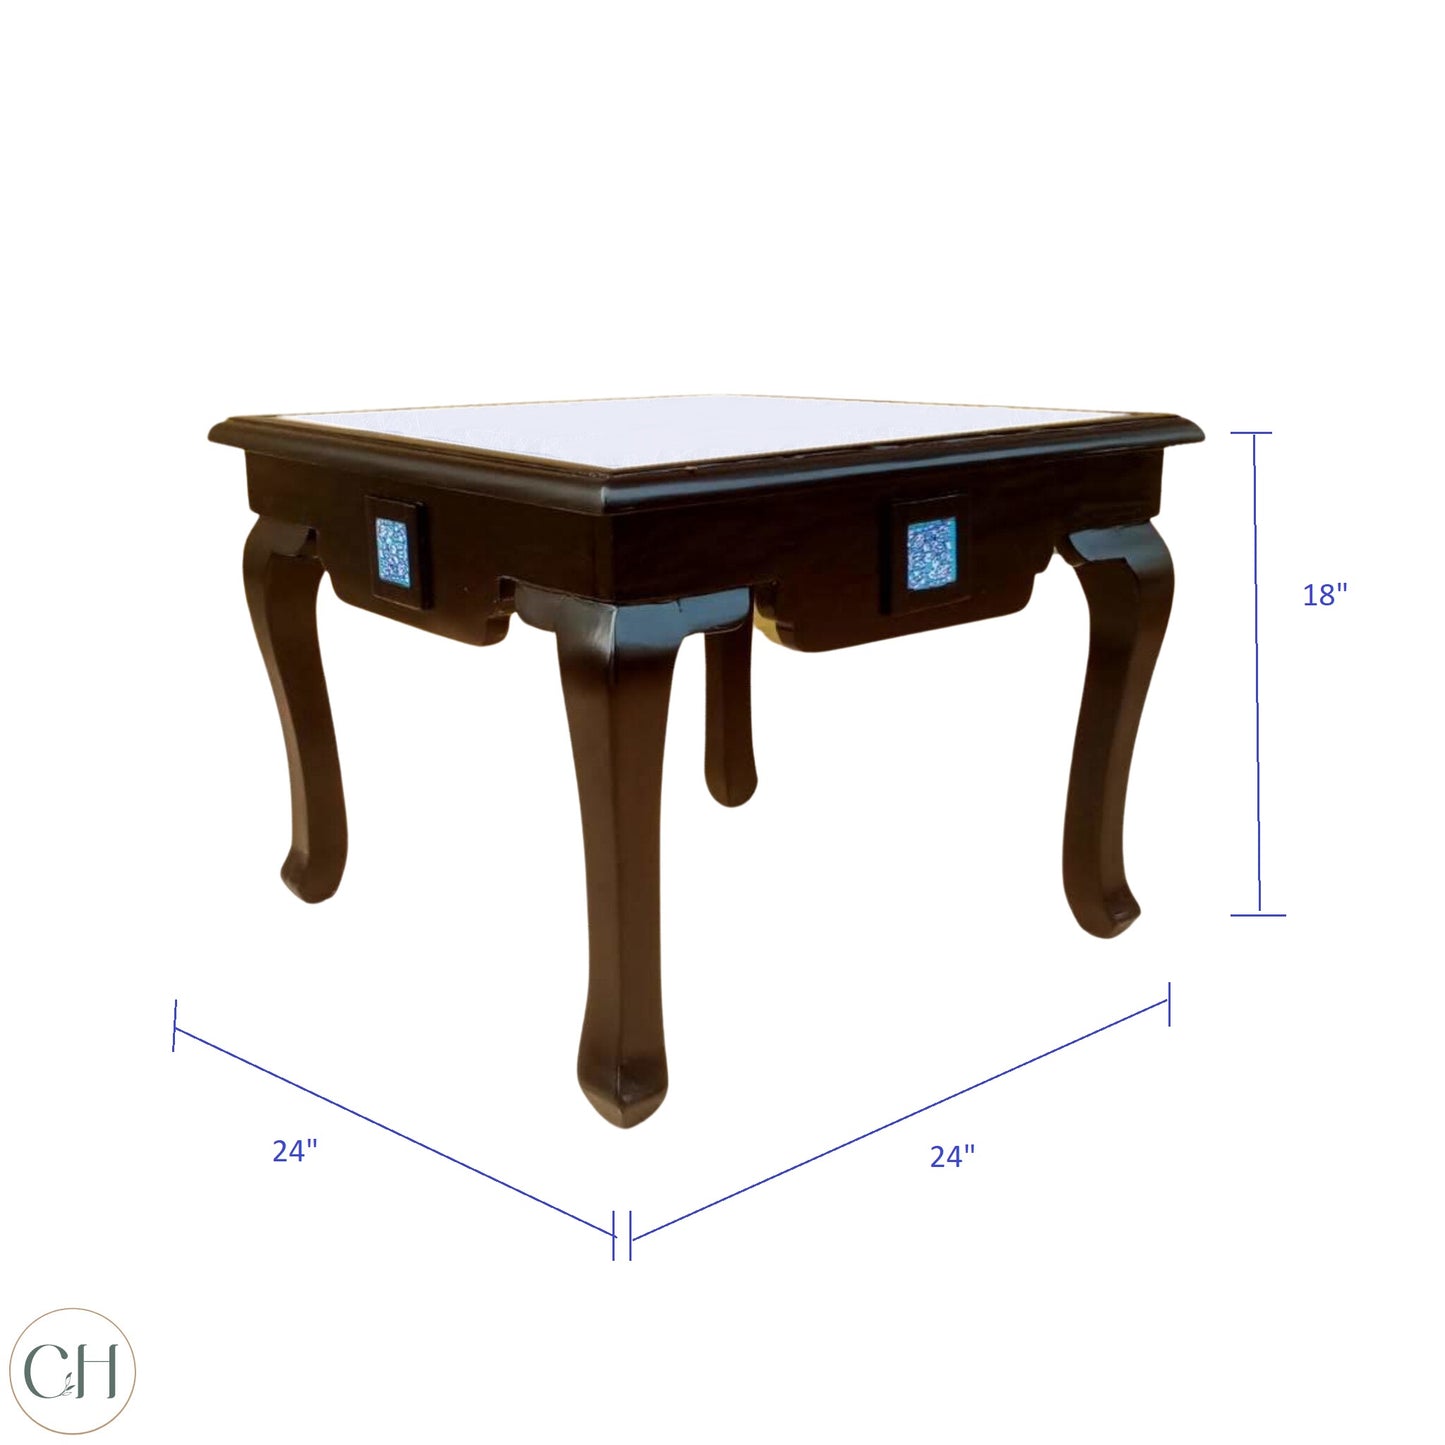 Viola - Ornate Solid Wood Side Table with Toughened Glass Top - CustHum